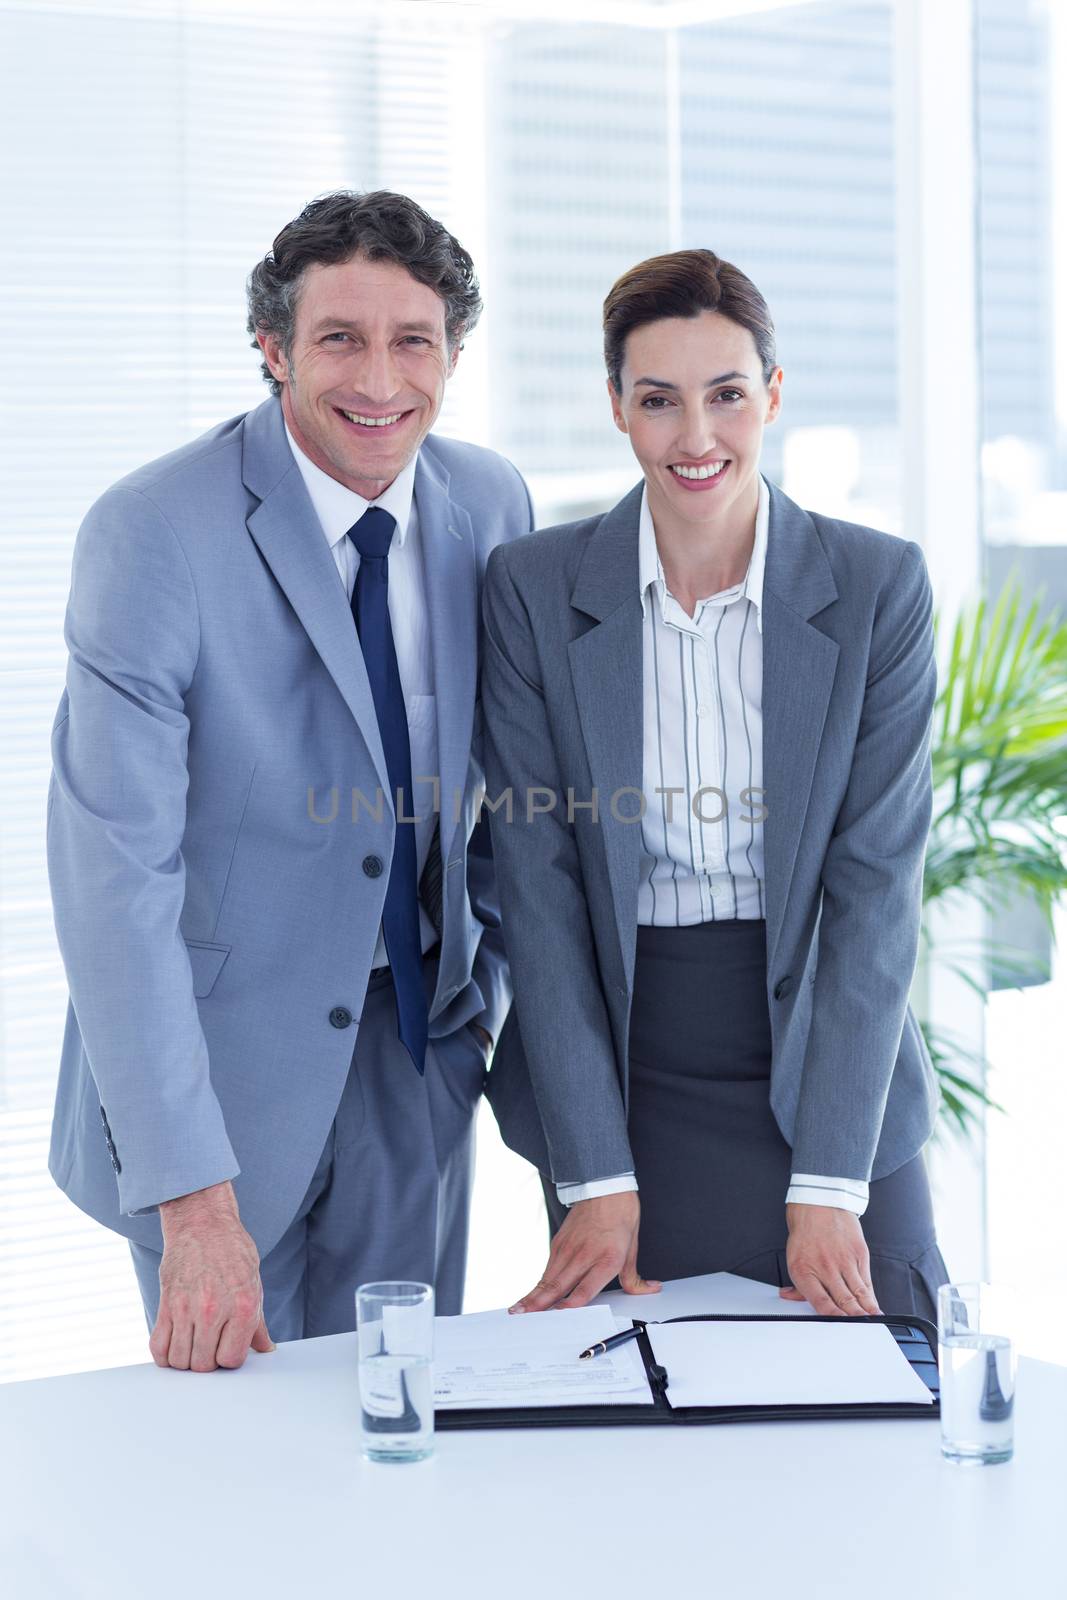 Smiling business people looking at camera in an office